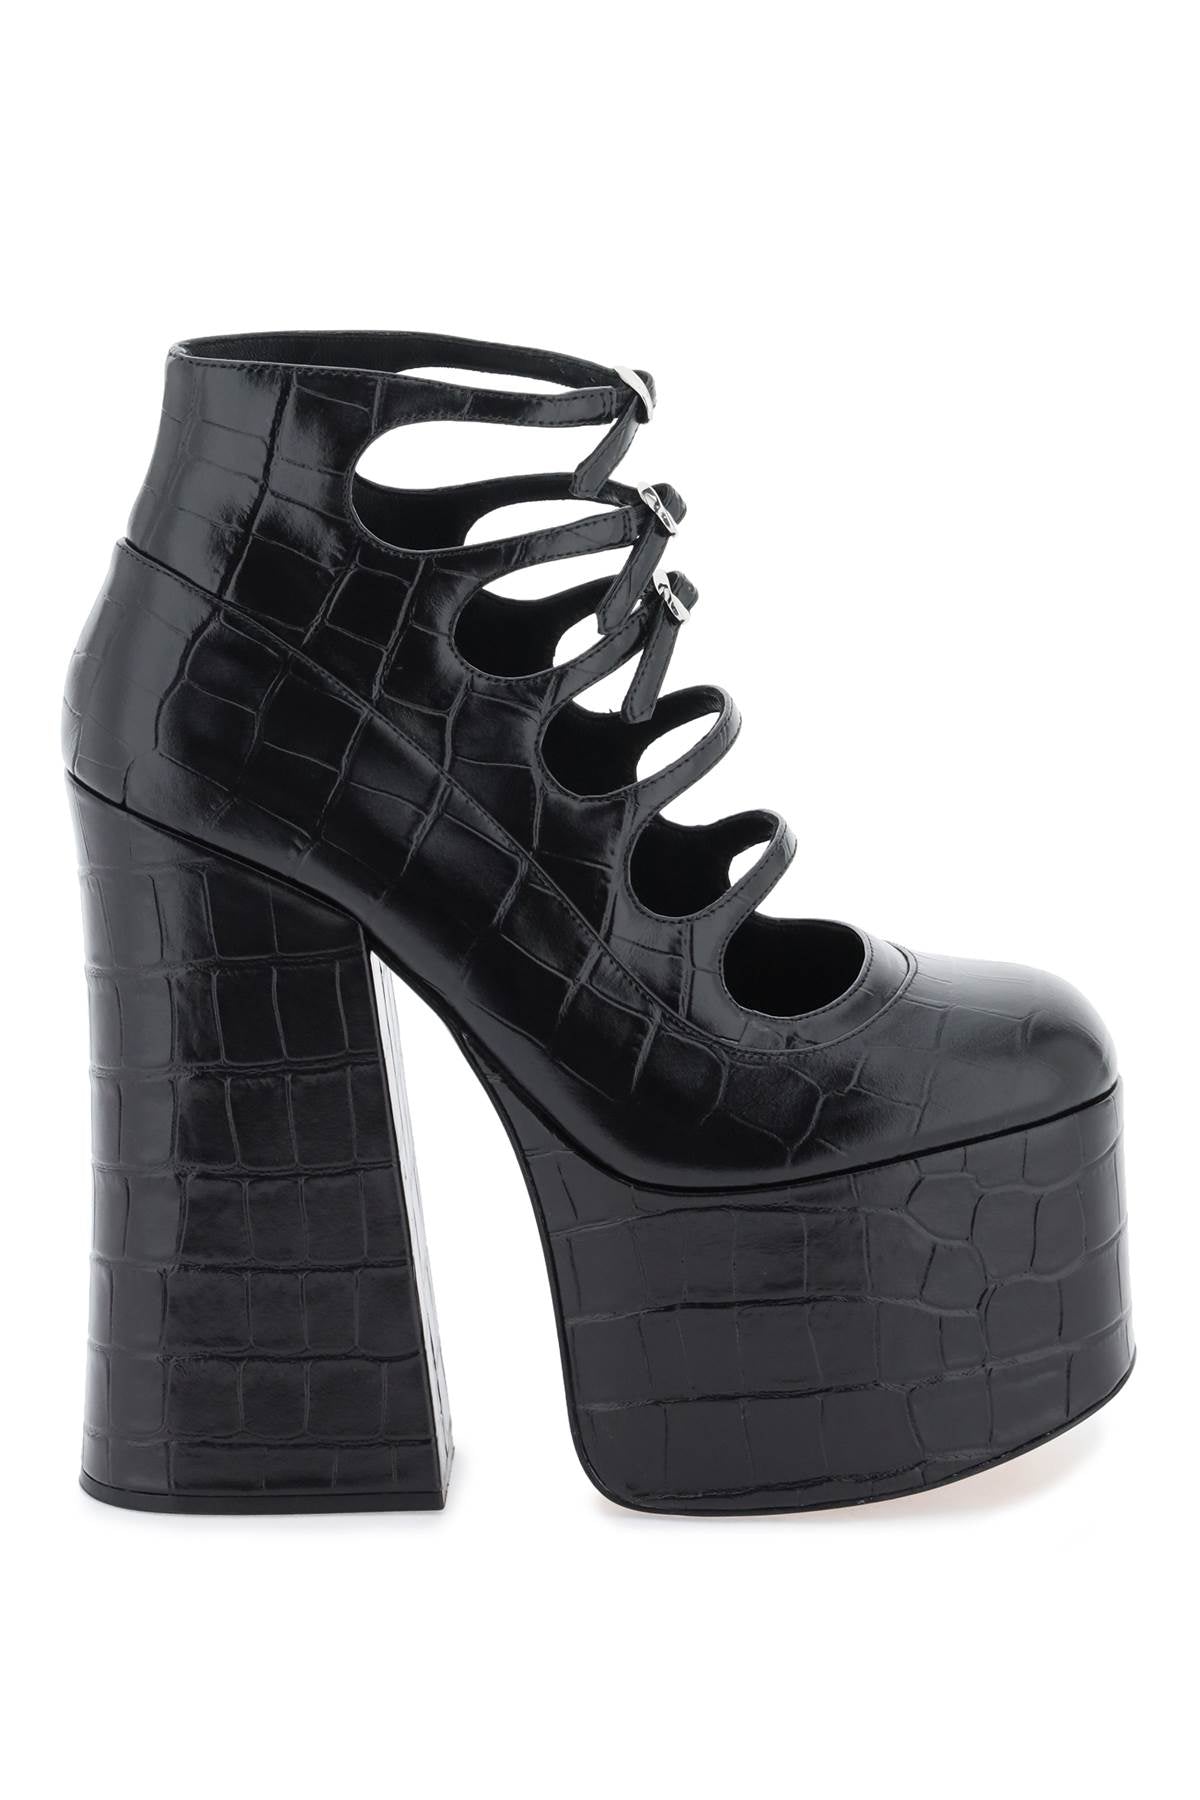 MARC JACOBS The Croc Embossed Kiki Ankle Boots - Women's Black Boots with Cut-Out Details and Maxi Heel and Platform